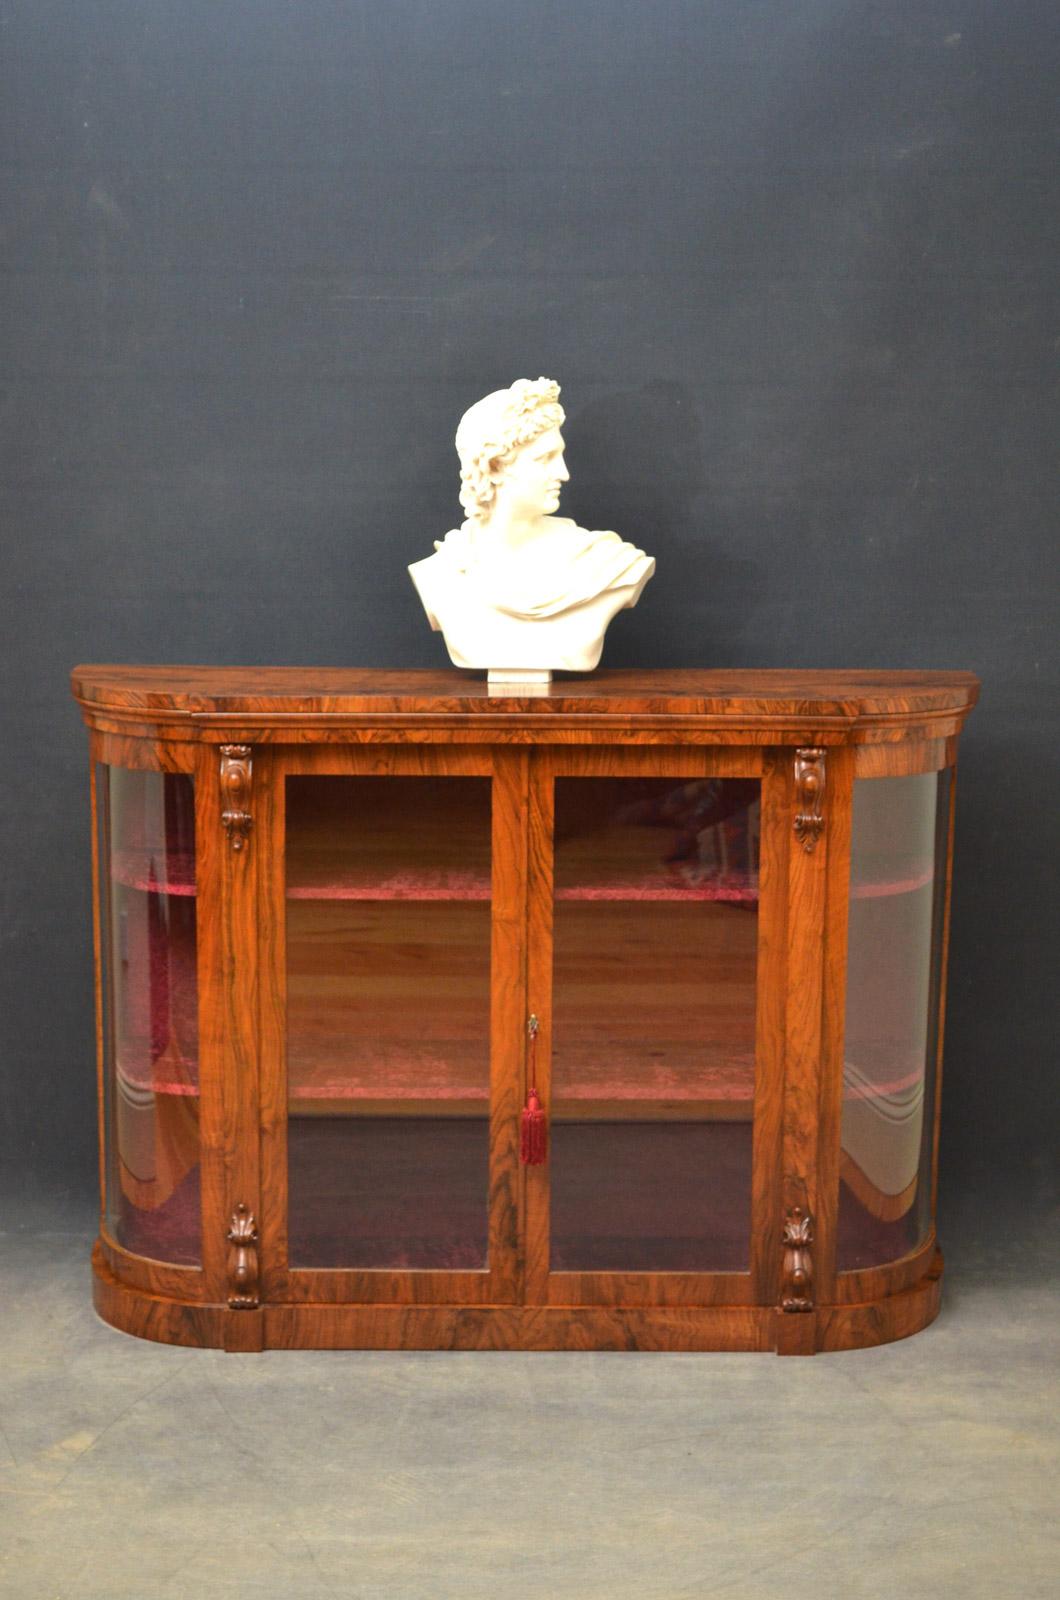 Sn4237 An elegant Victorian walnut display cabinet, having figured top above a pair of glazed doors enclosing crushed velvet interior, flanked by Fine drop carving and bowed glazed ends, all standing on plinth base. This fine cabinet has been